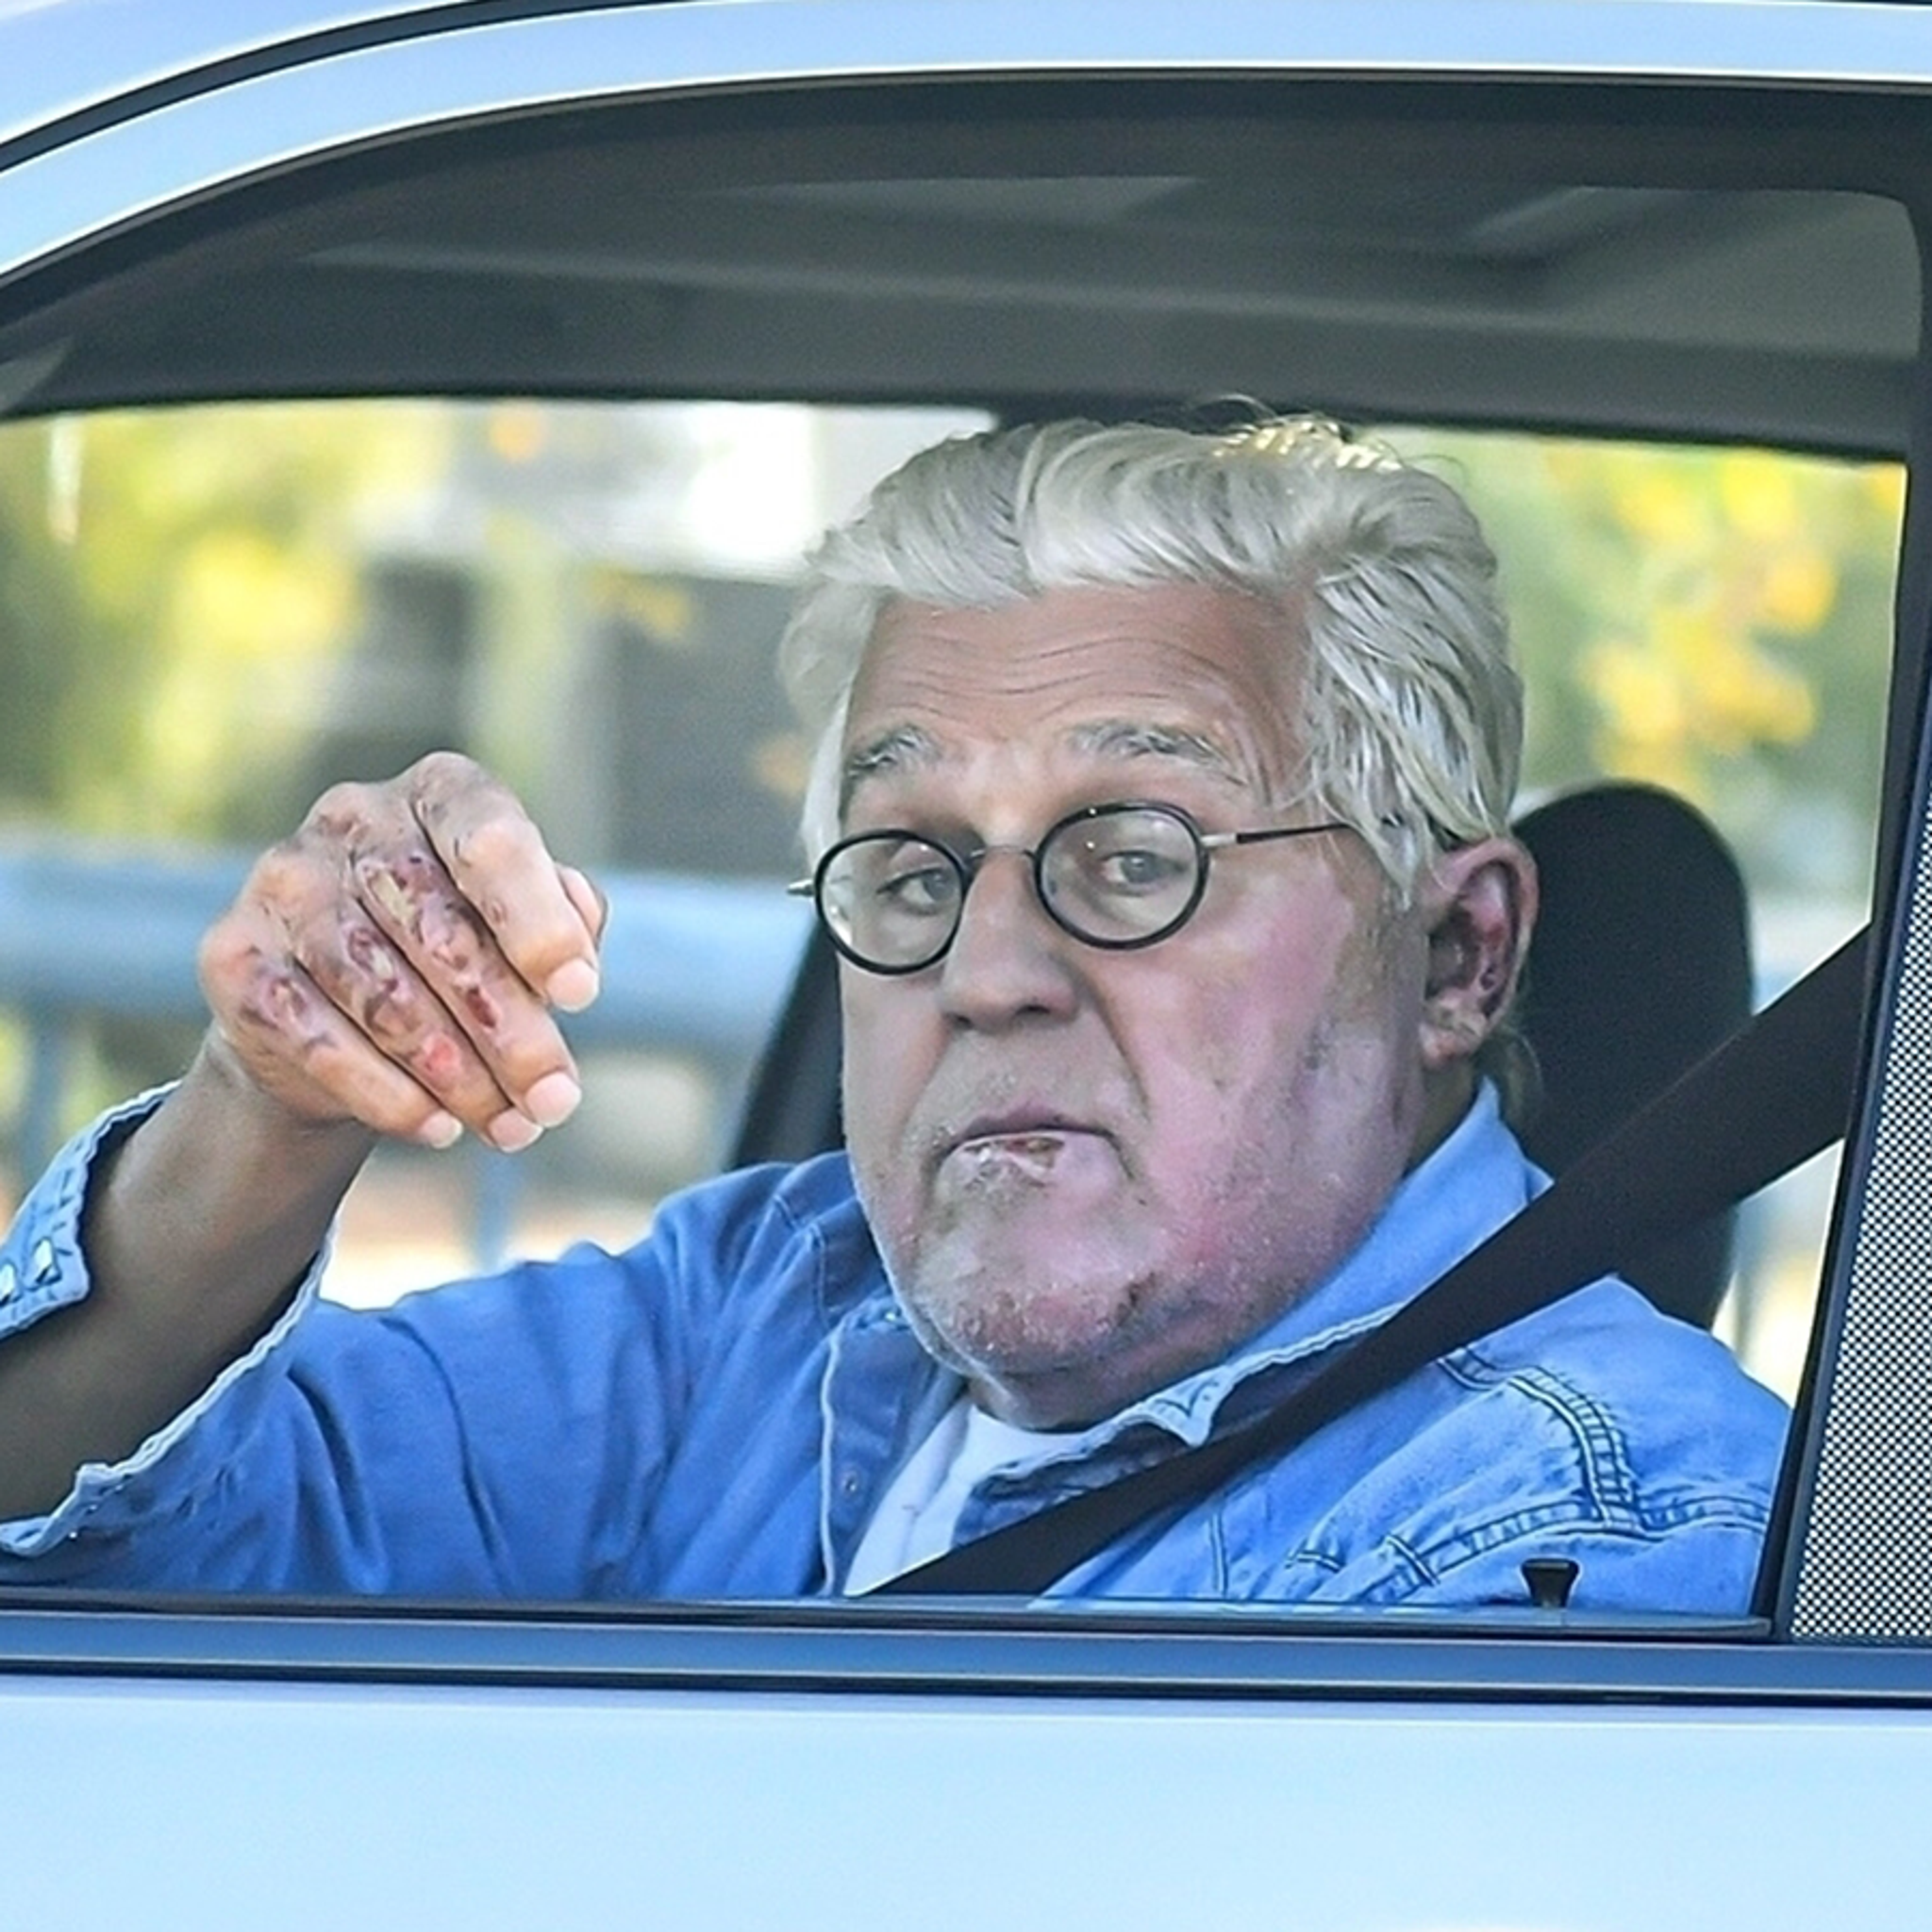 Jay Leno Heads Back to Garage 10 Days After Car Fire Accident - TMZ (Picture 2)